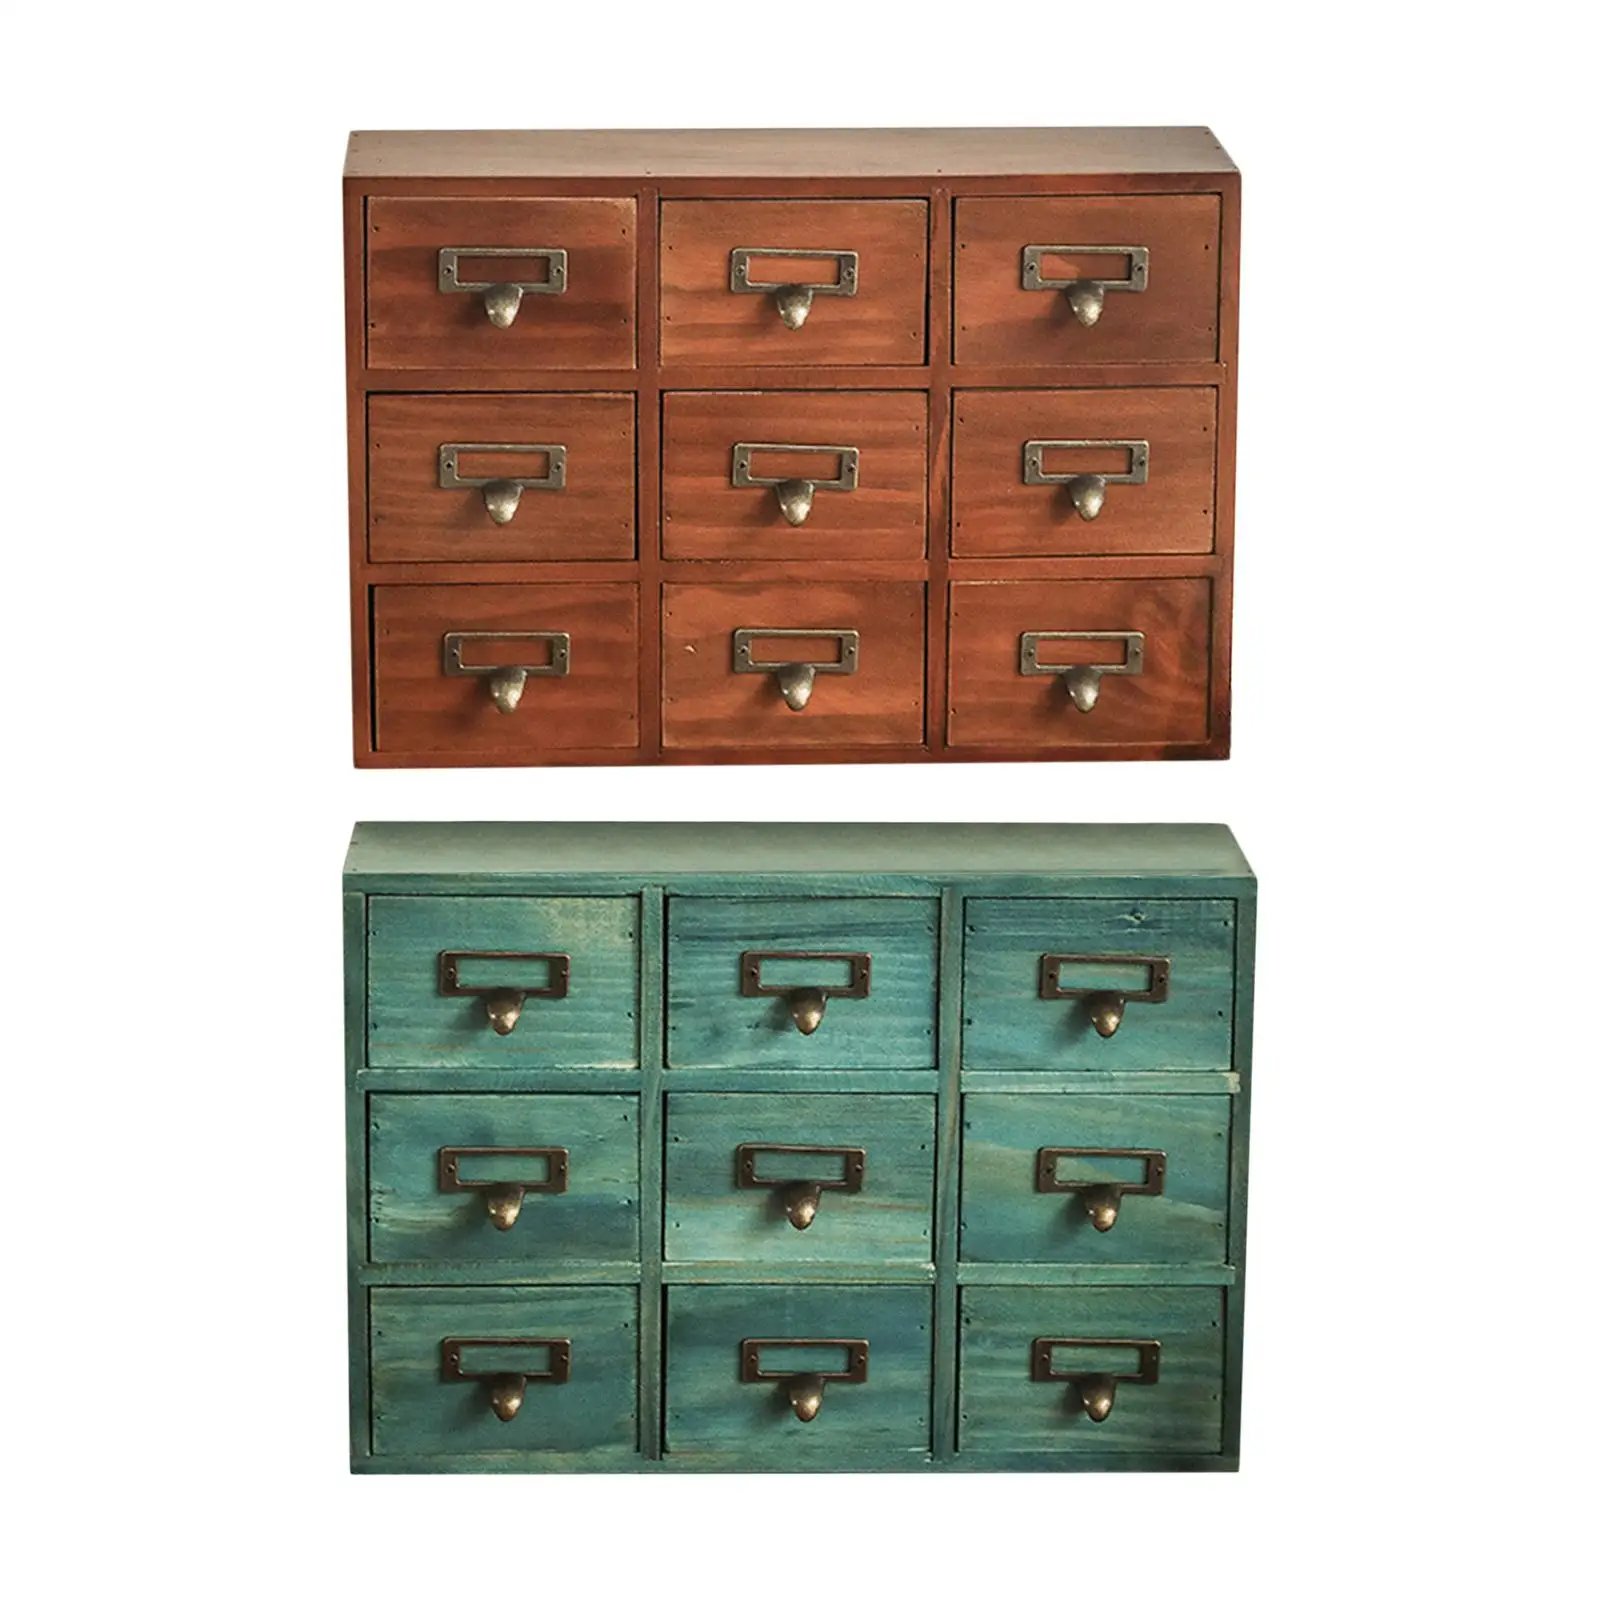 Desktop Storage Cabinet with 9 Drawers Retro Look Wooden with Metal Pulls Medicine Cabinet for Organization Home Bedroom Counter